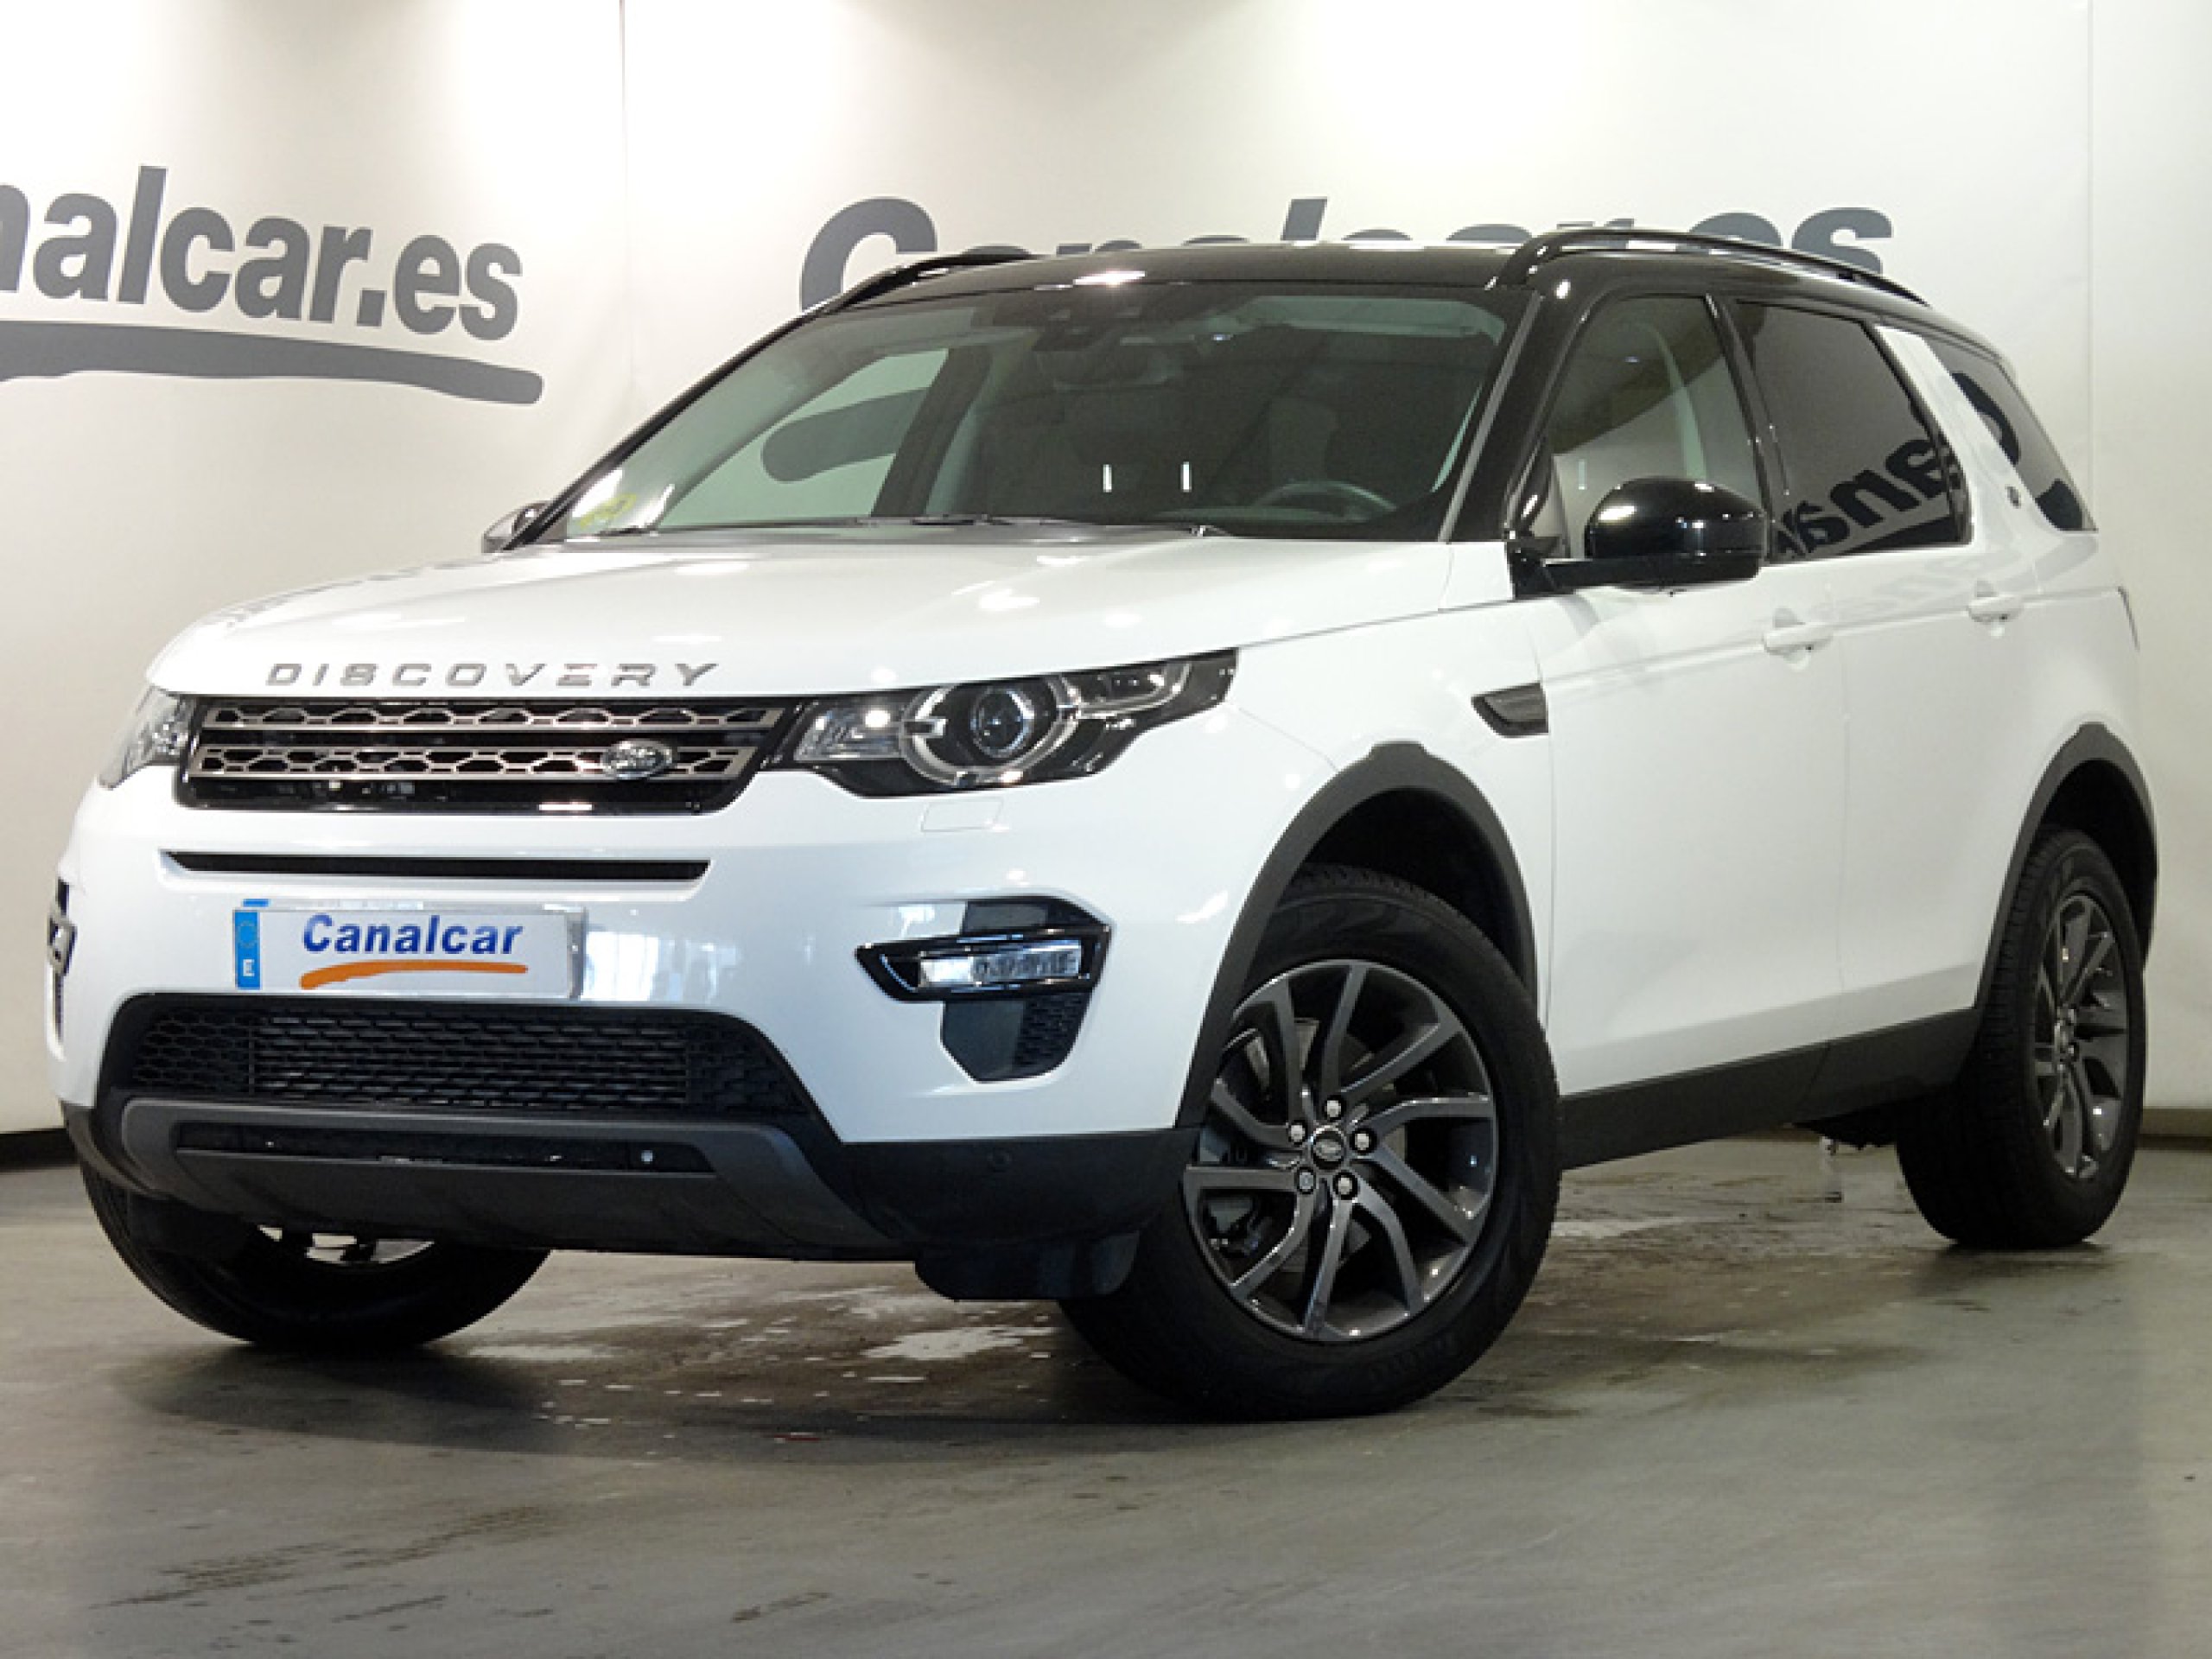 Foto Land Rover Discovery 1